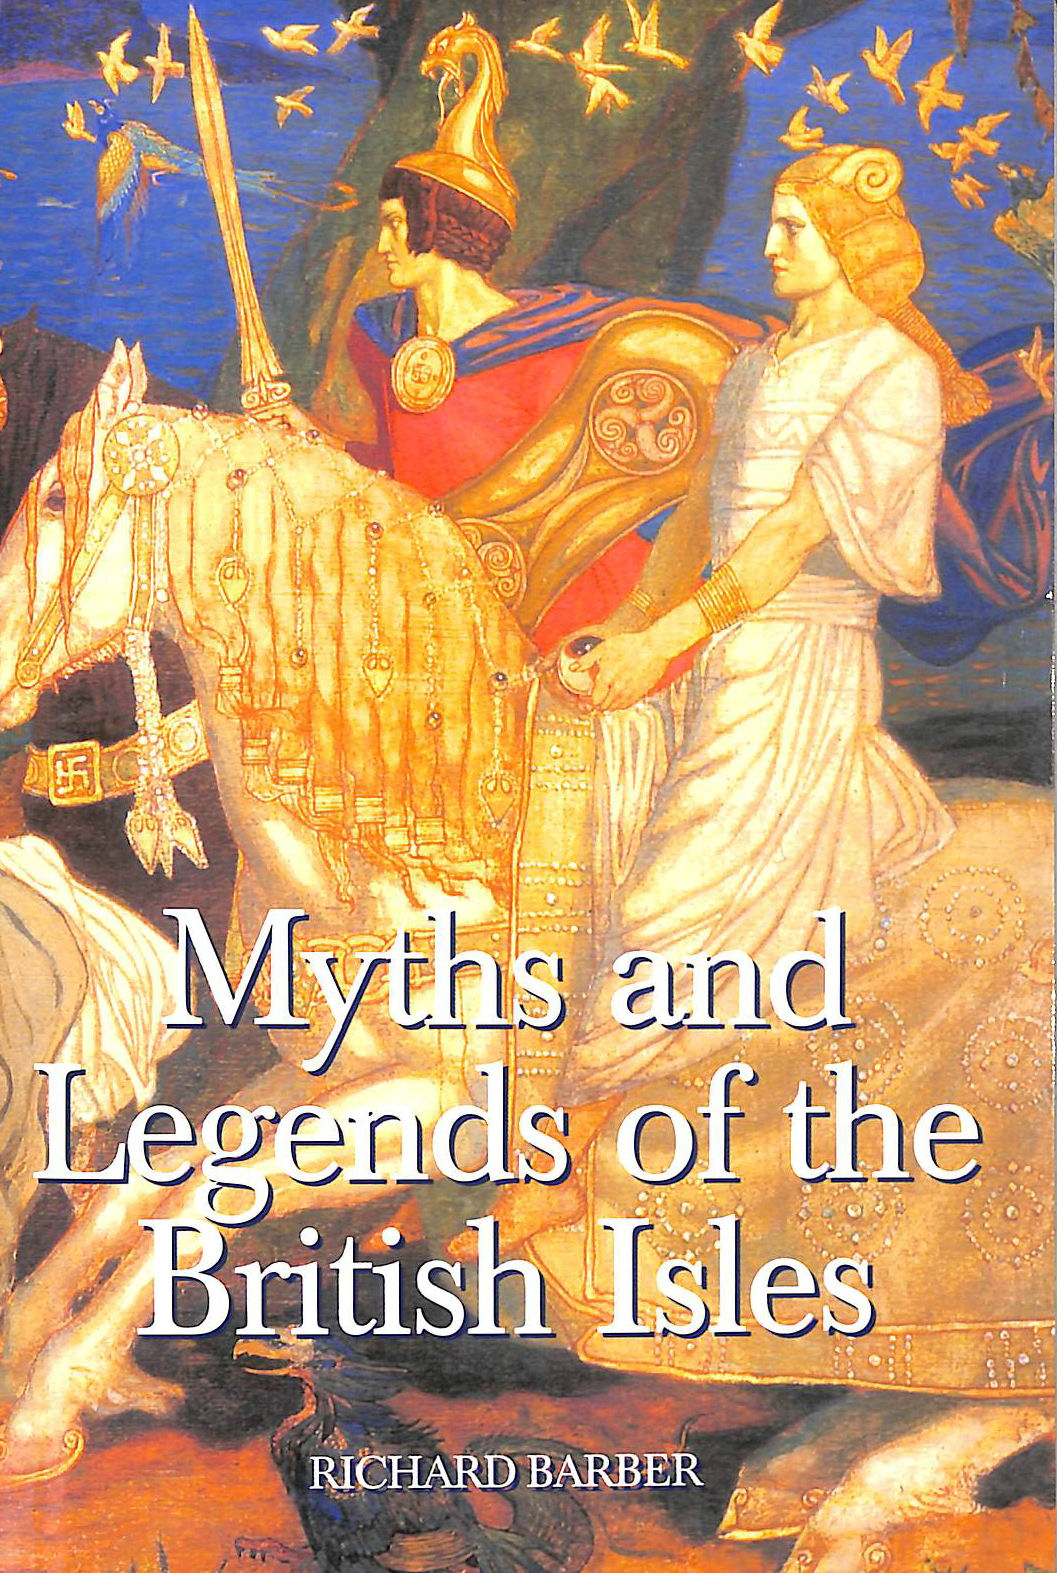 BARBER, RICHARD - Myths and Legends of the British Isles (0)